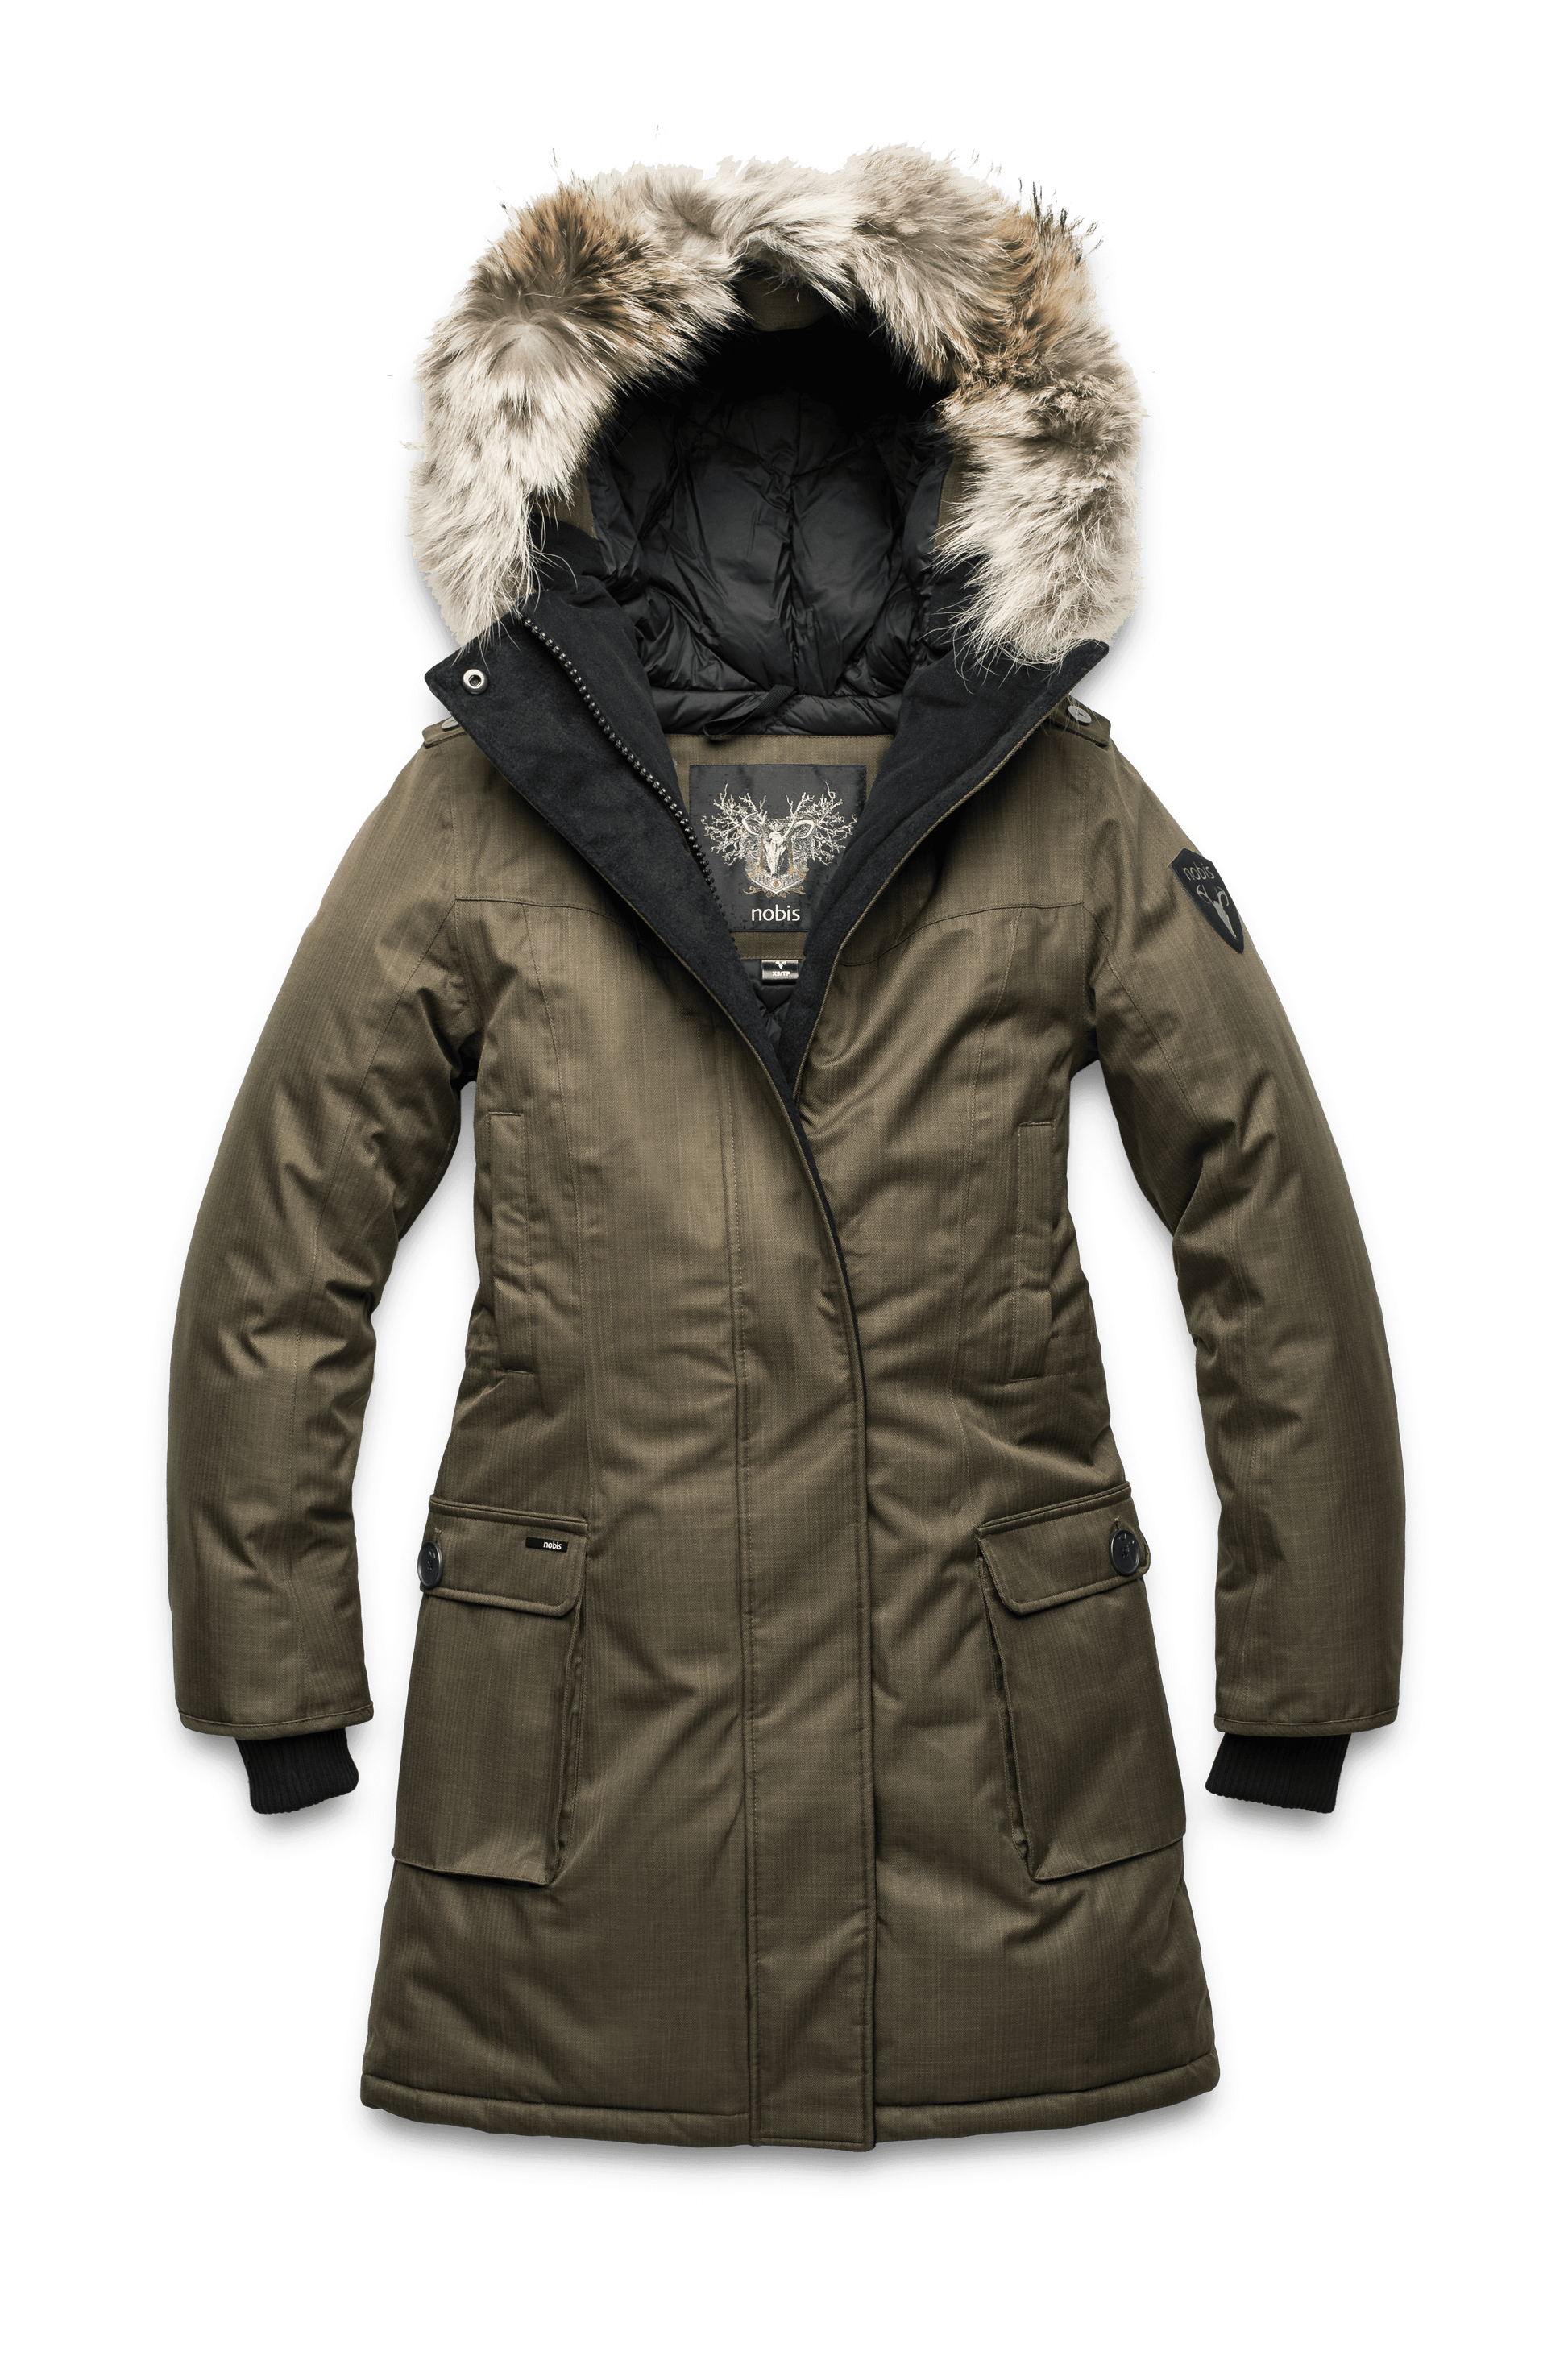 Women's knee length down filled parka with fur trim hood in Fatigue